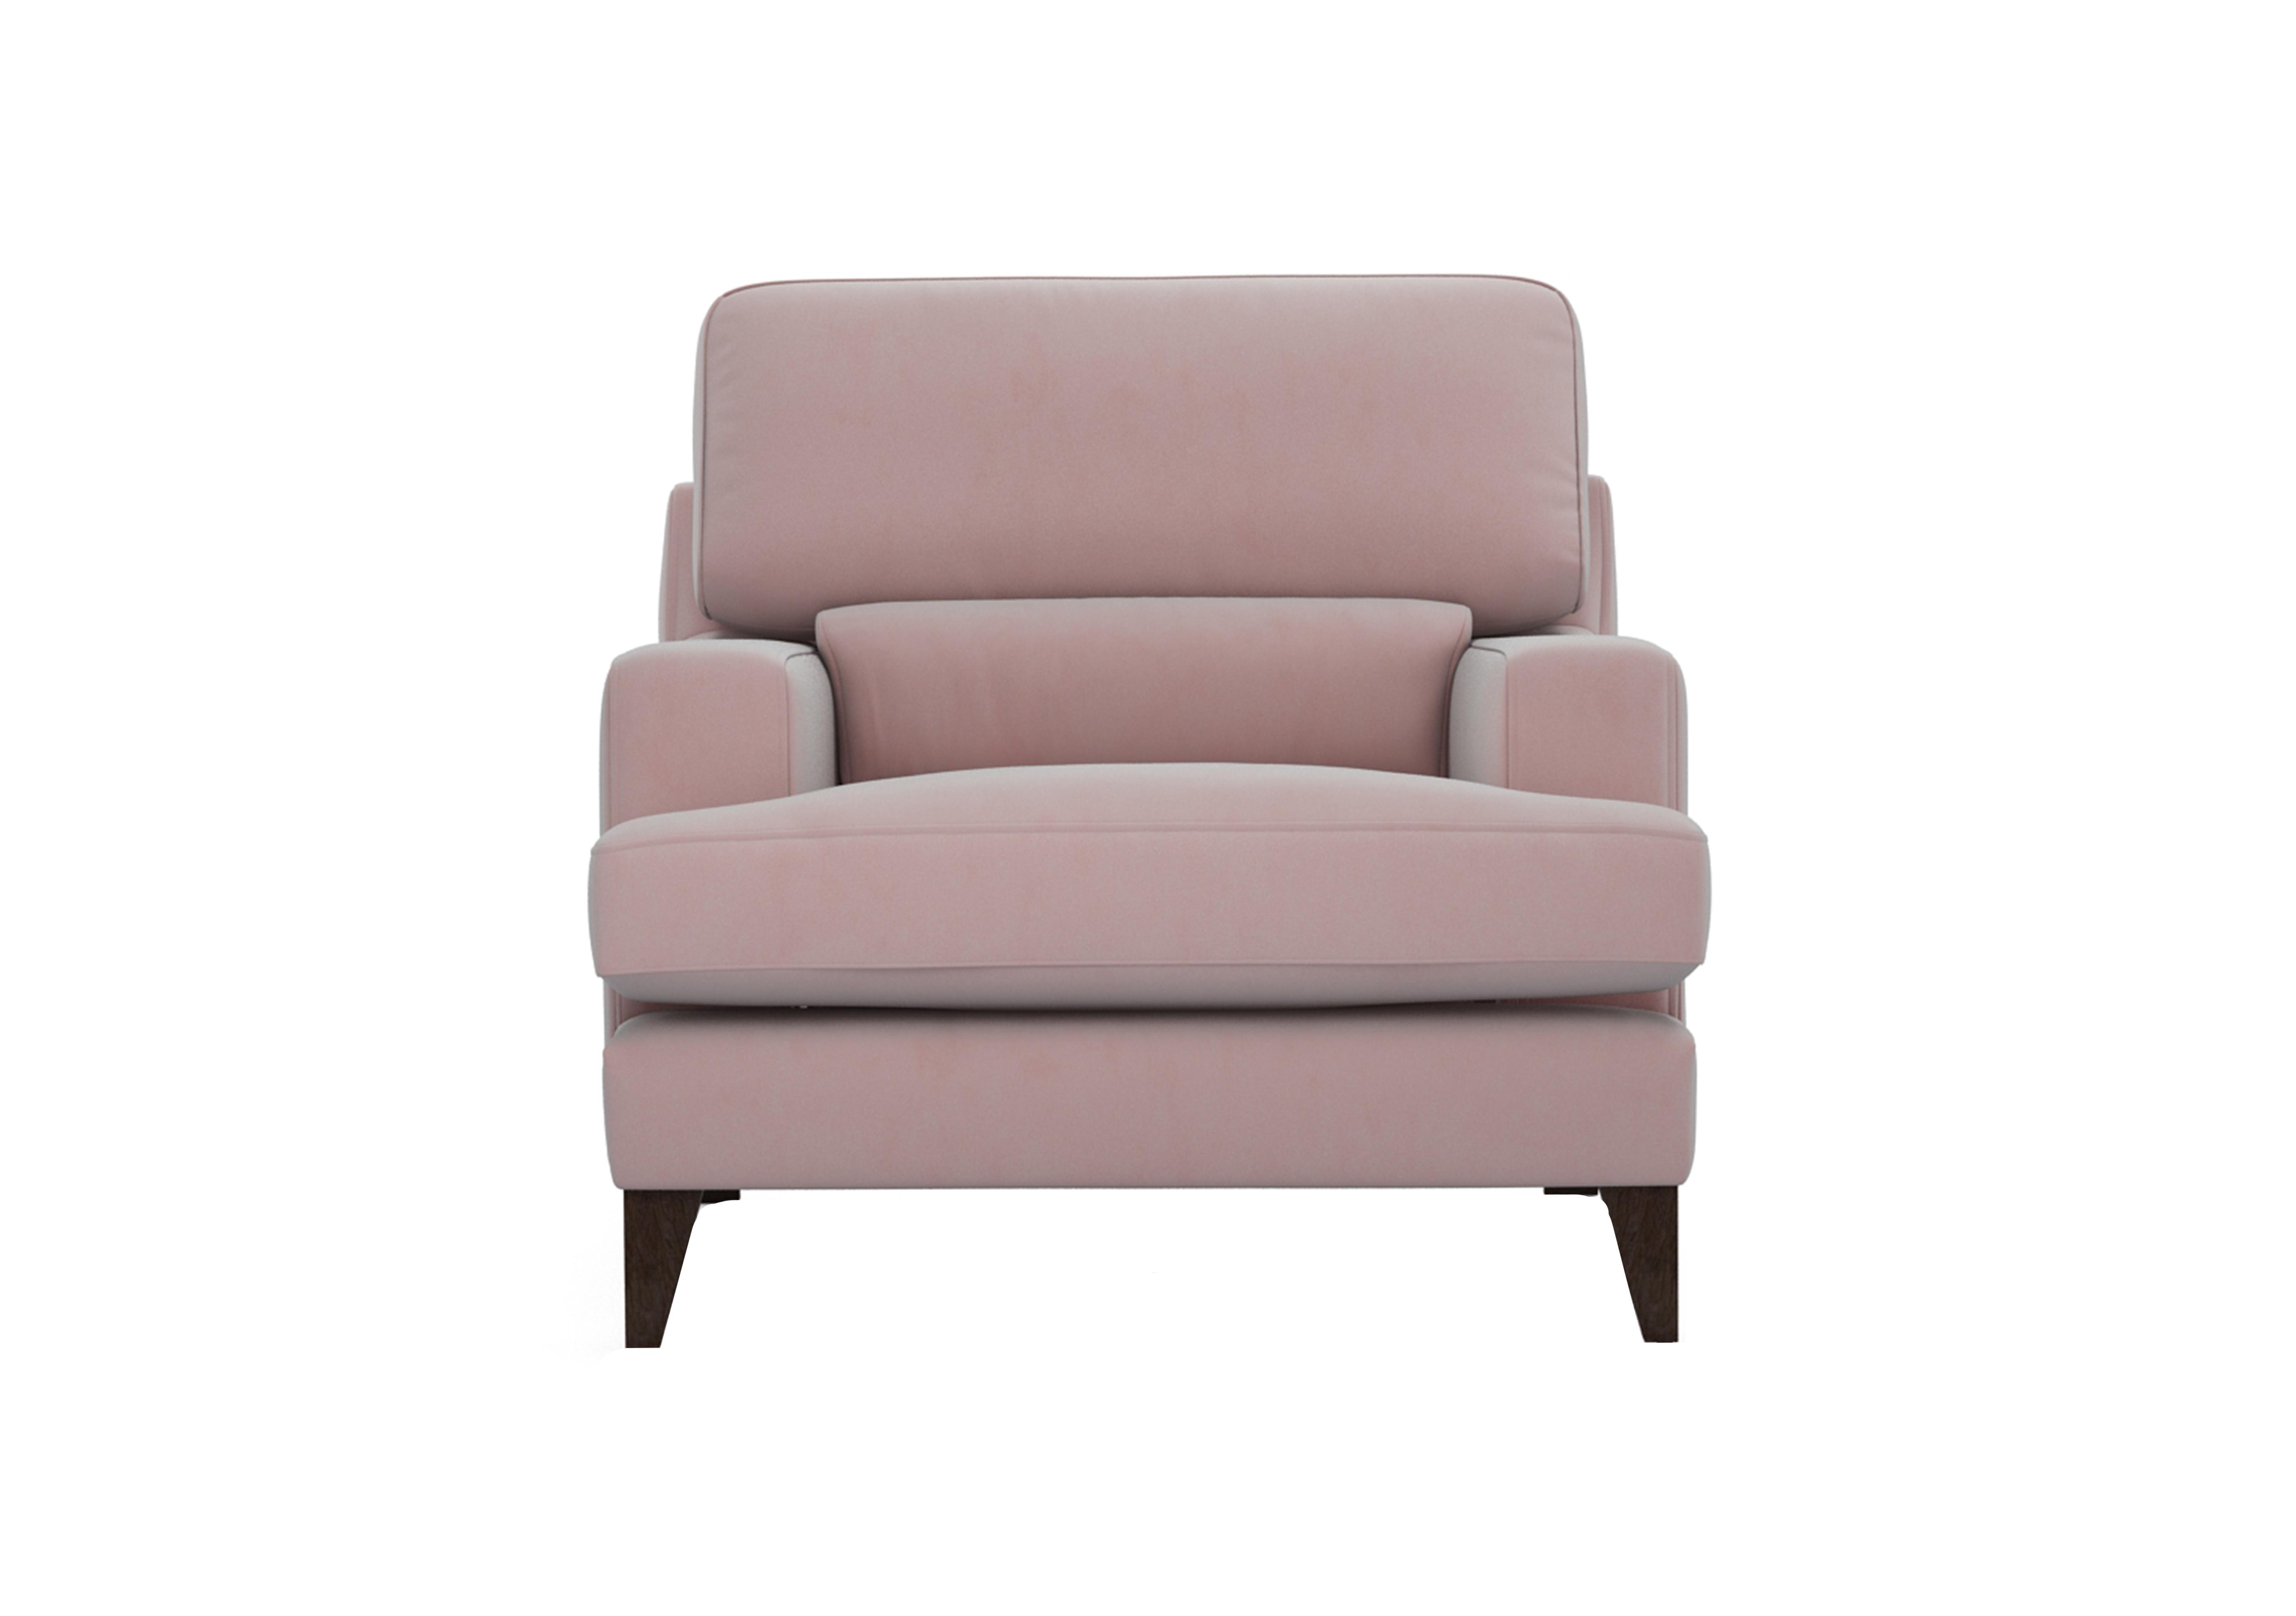 Romilly Fabric Armchair in Cot256 Cotton Candy Wa Ft on Furniture Village